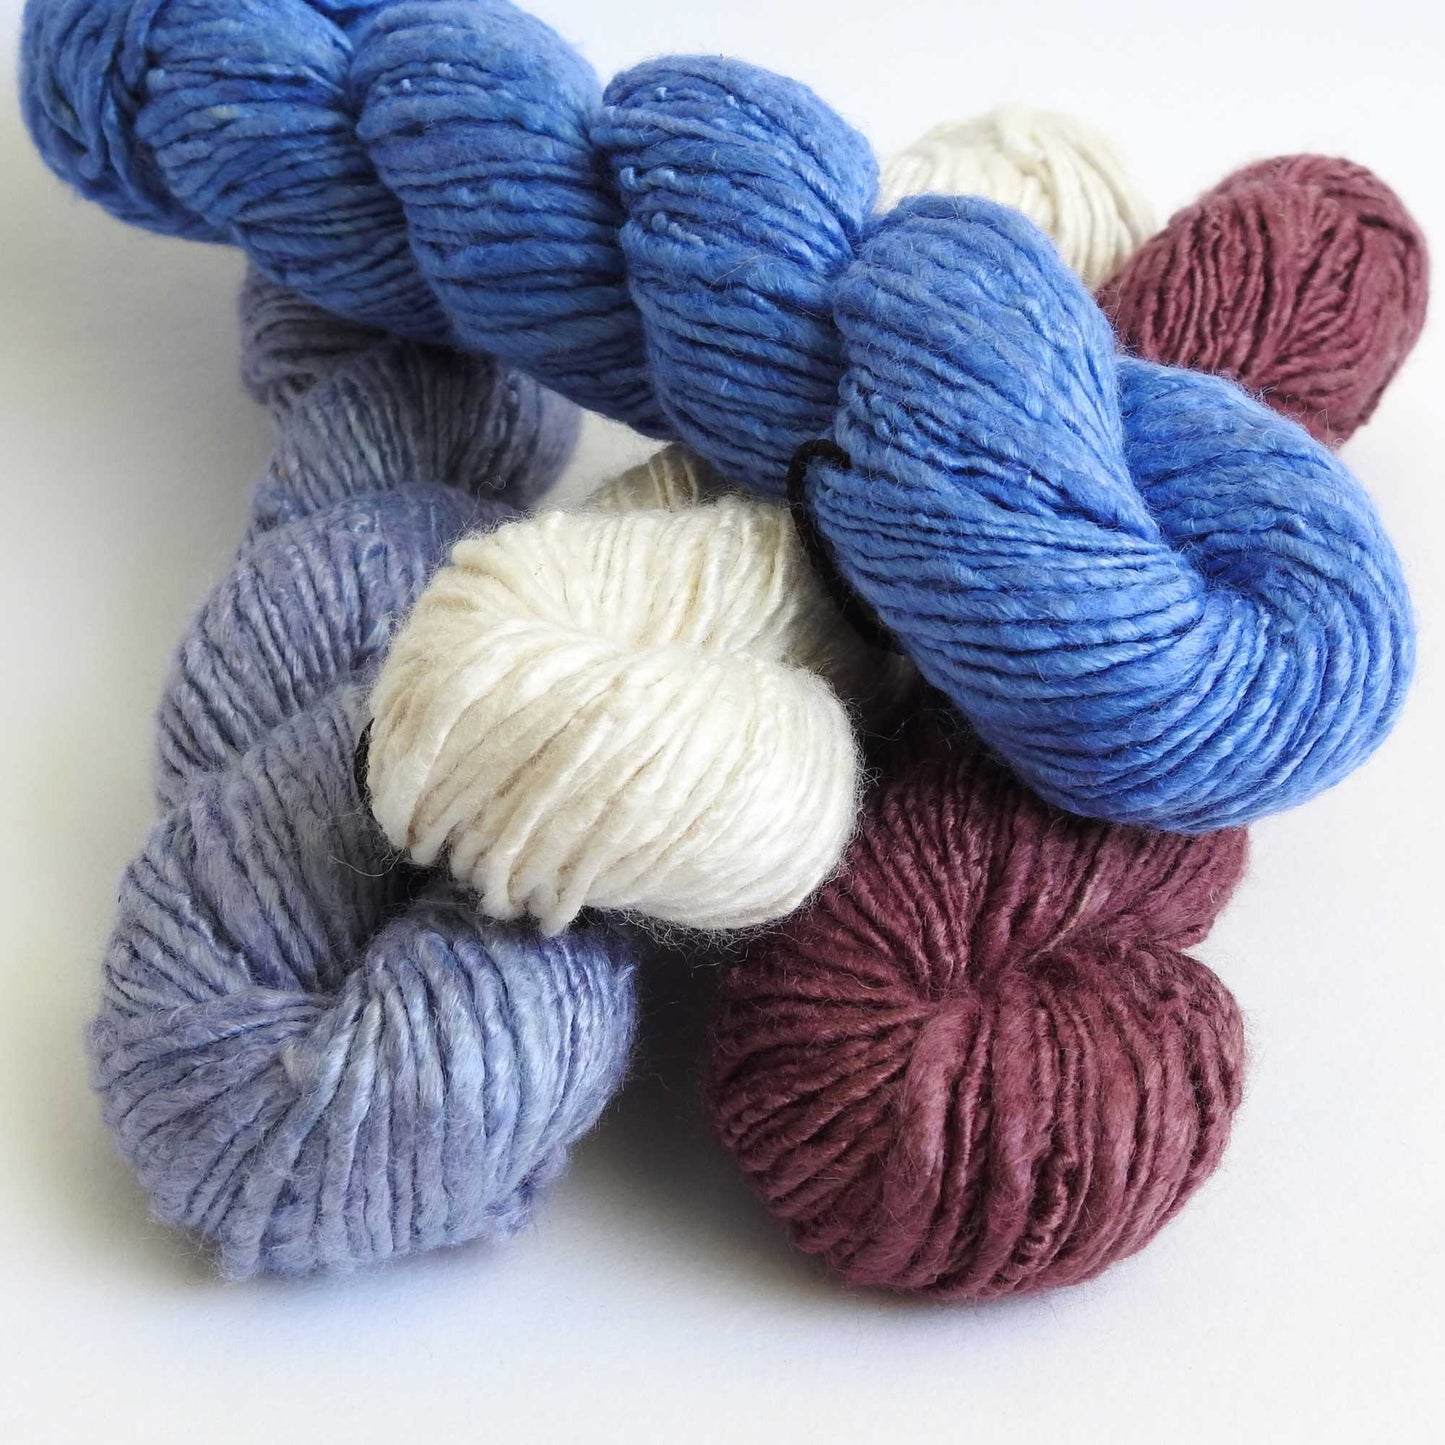 bunch of bamboo yarn skeins. a vegan yarn which is ideal for knitting, weaving, crochet & craft. soft bamboo yarn